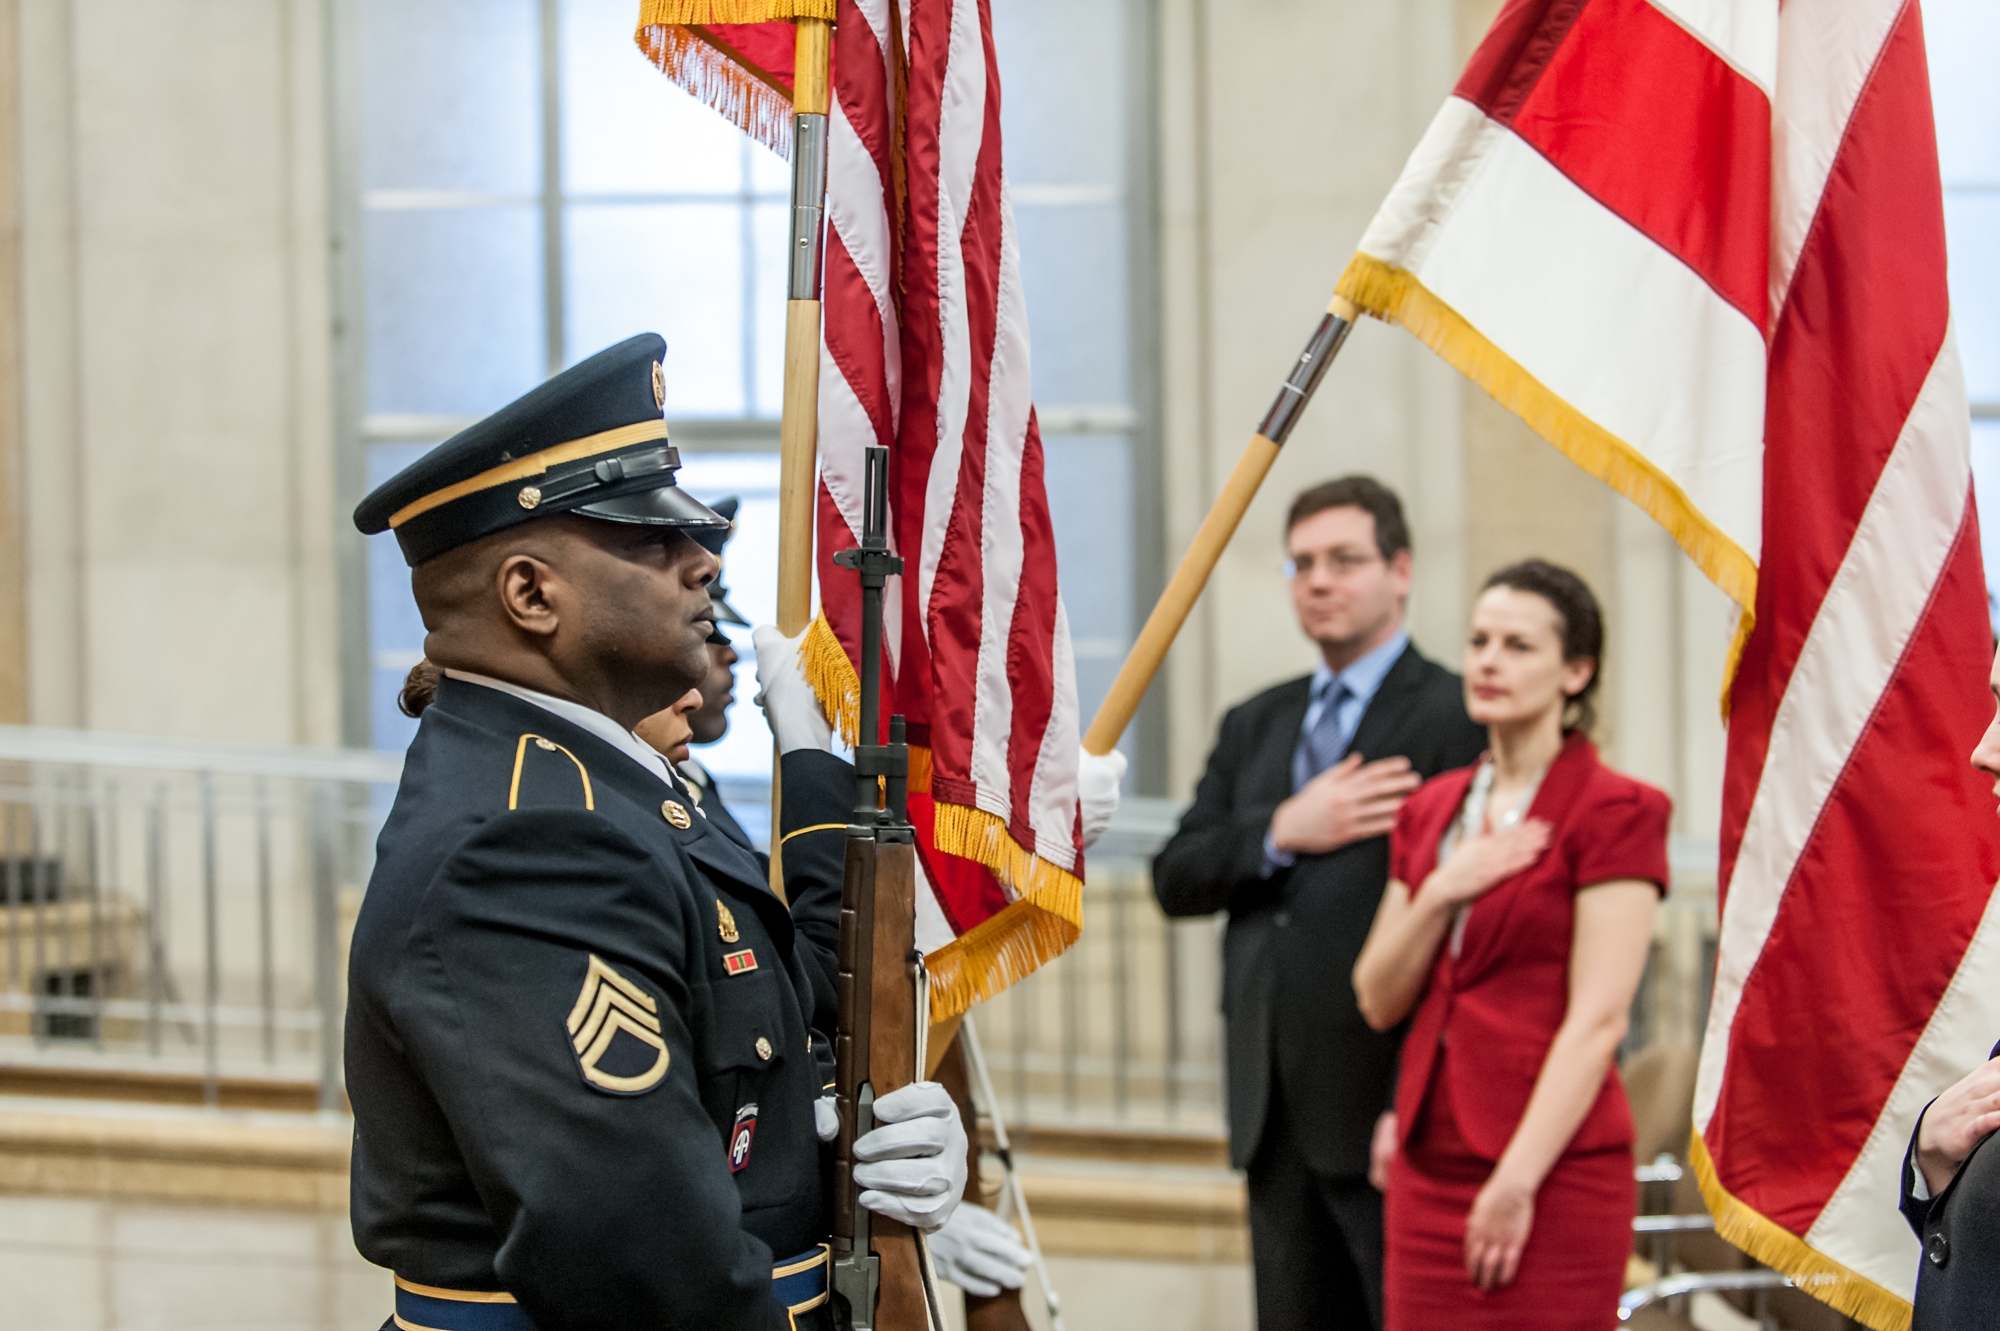 Guests stand for the National Anthem at the opening ceremony for the U.S. Department of Justice's Sunshine Week Celebration.